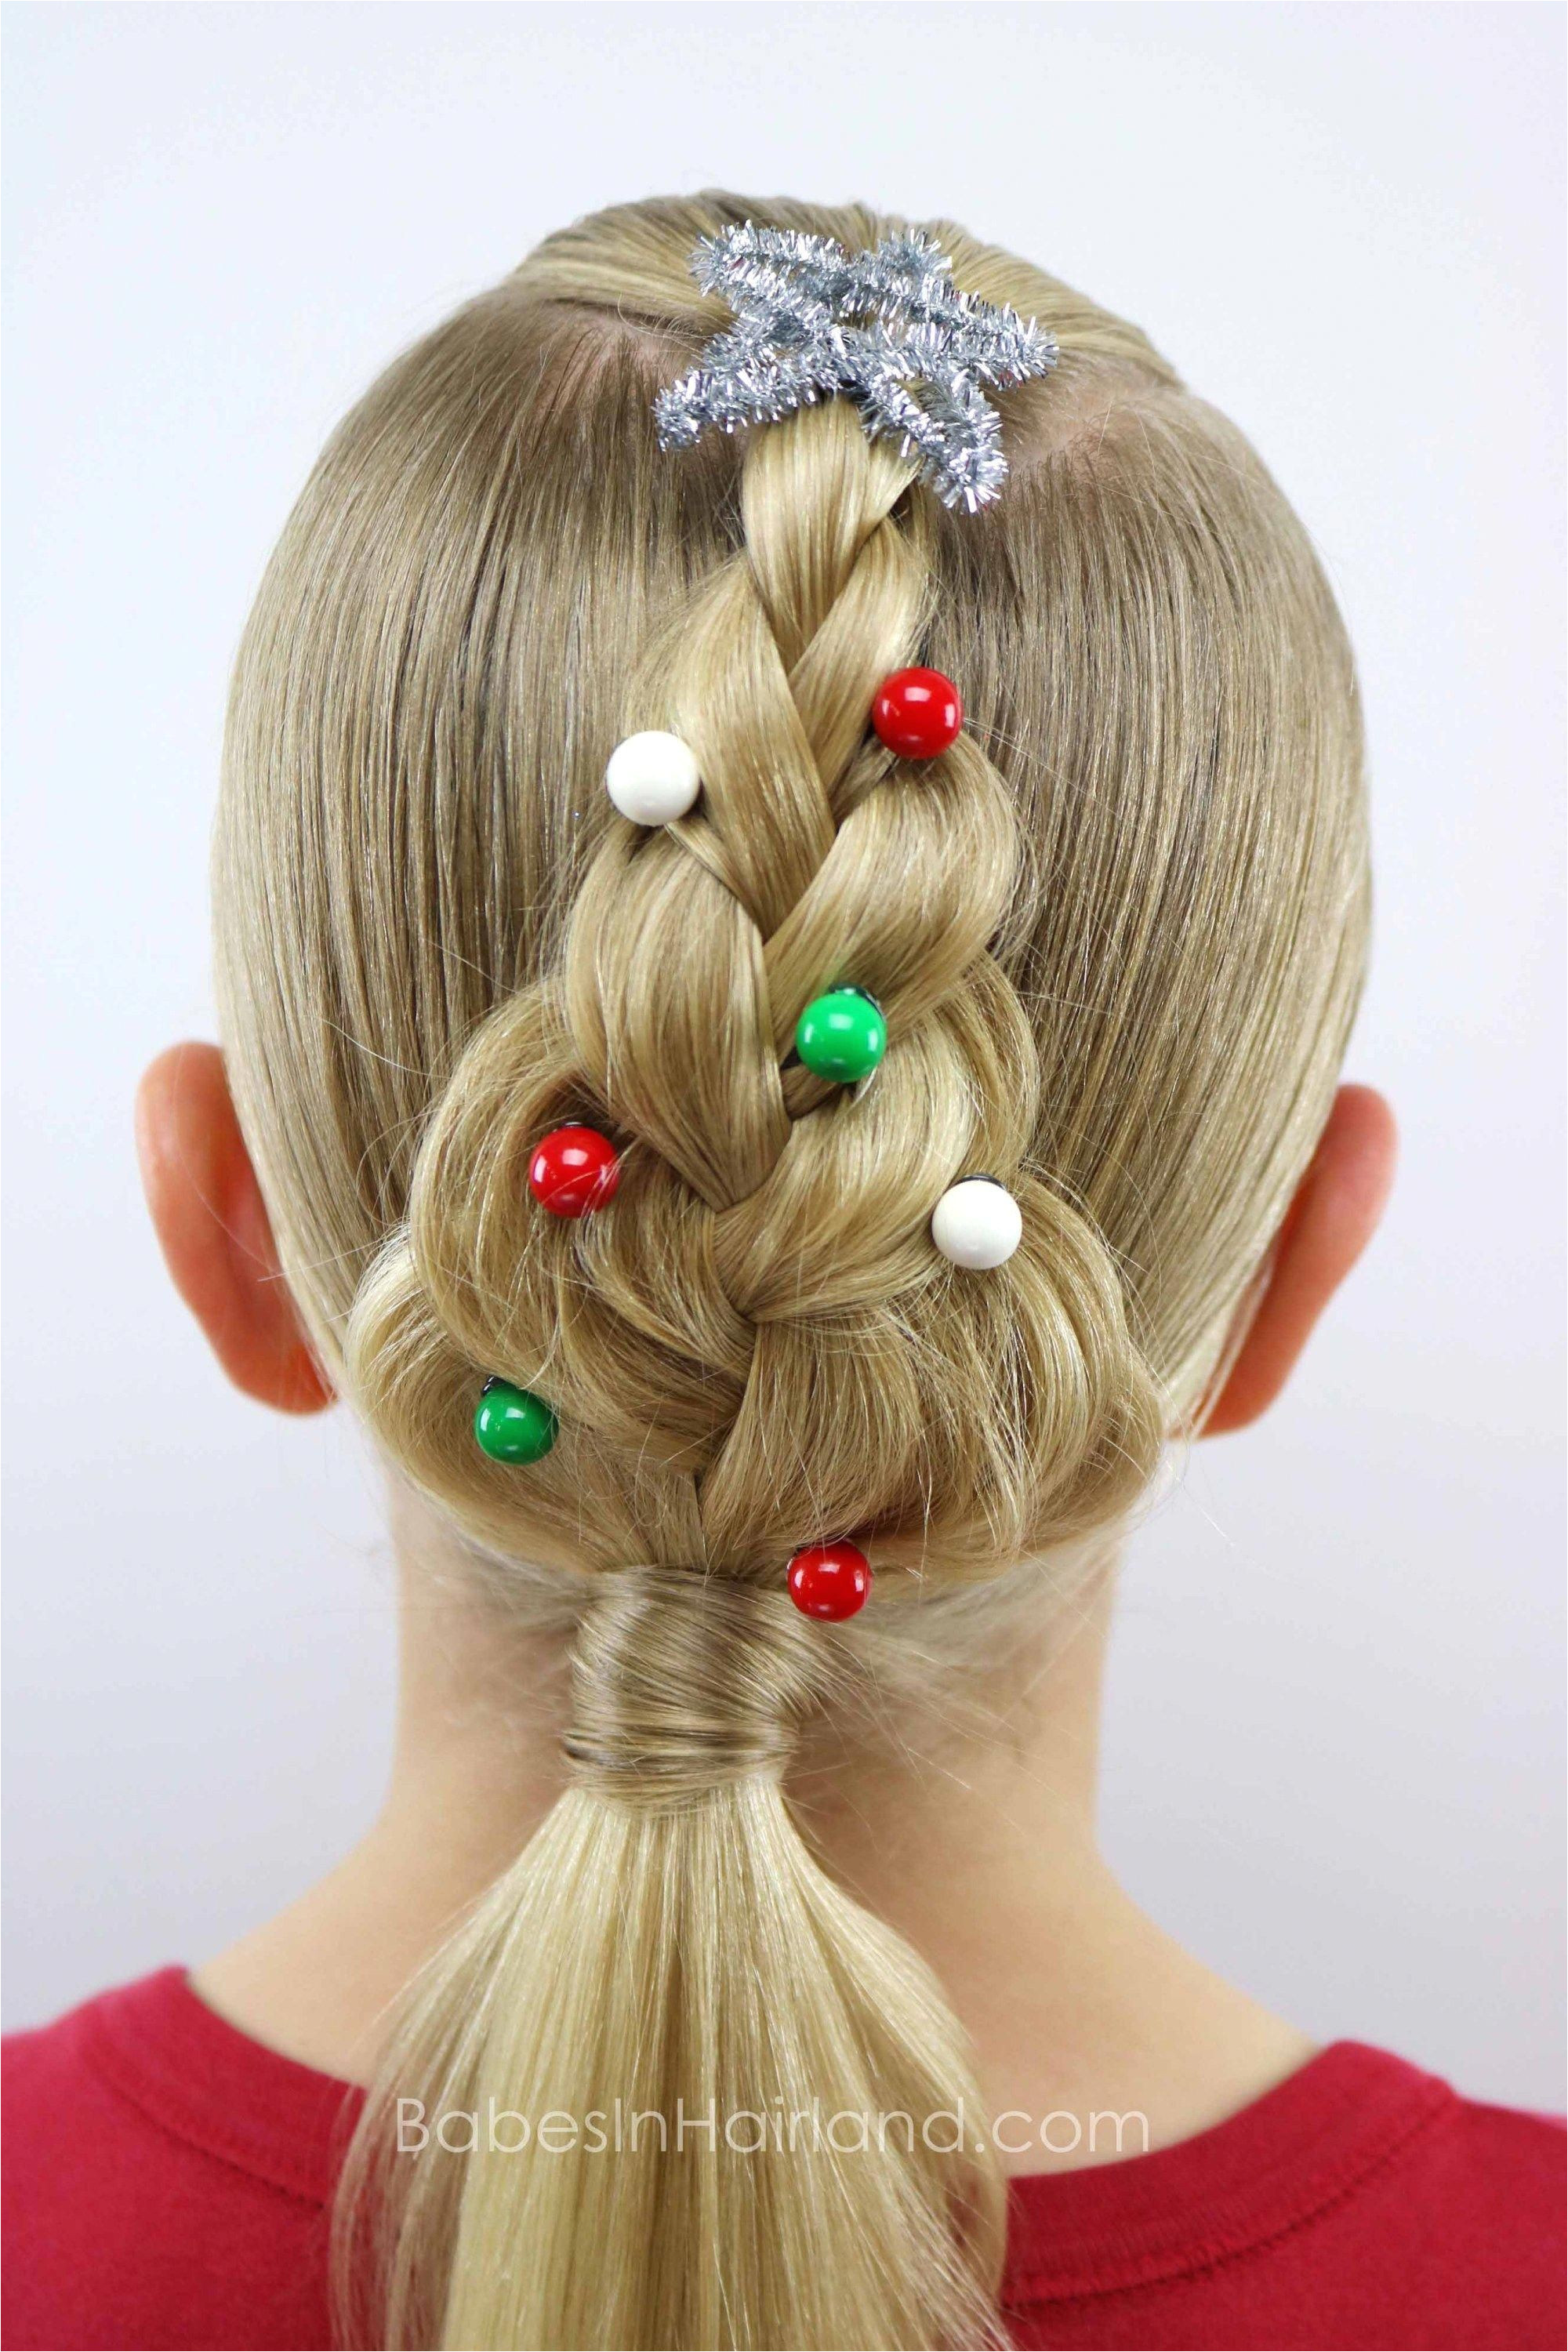 For an easy Christmas hairstyle try this cute Christmas Tree Braid from BabesInHairland hair braids hairstyle easy hairstyle